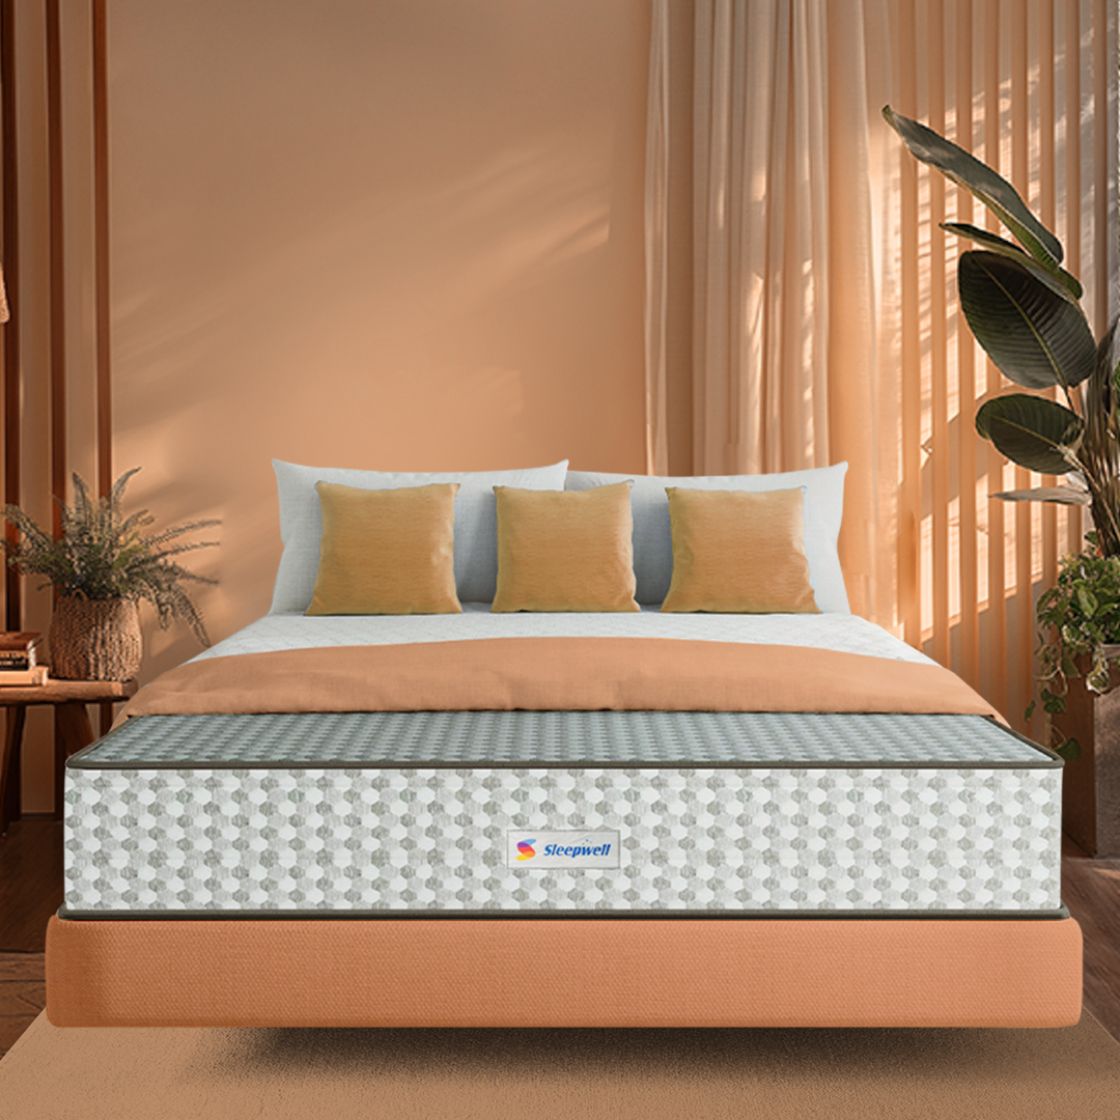 Sleepwell Dual PRO Profiled Foam Reversible 8-inch Queen Bed Size, Gentle and Firm, Triple Layered Anti Sag Foam Mattress (Grey, 84x60x8)